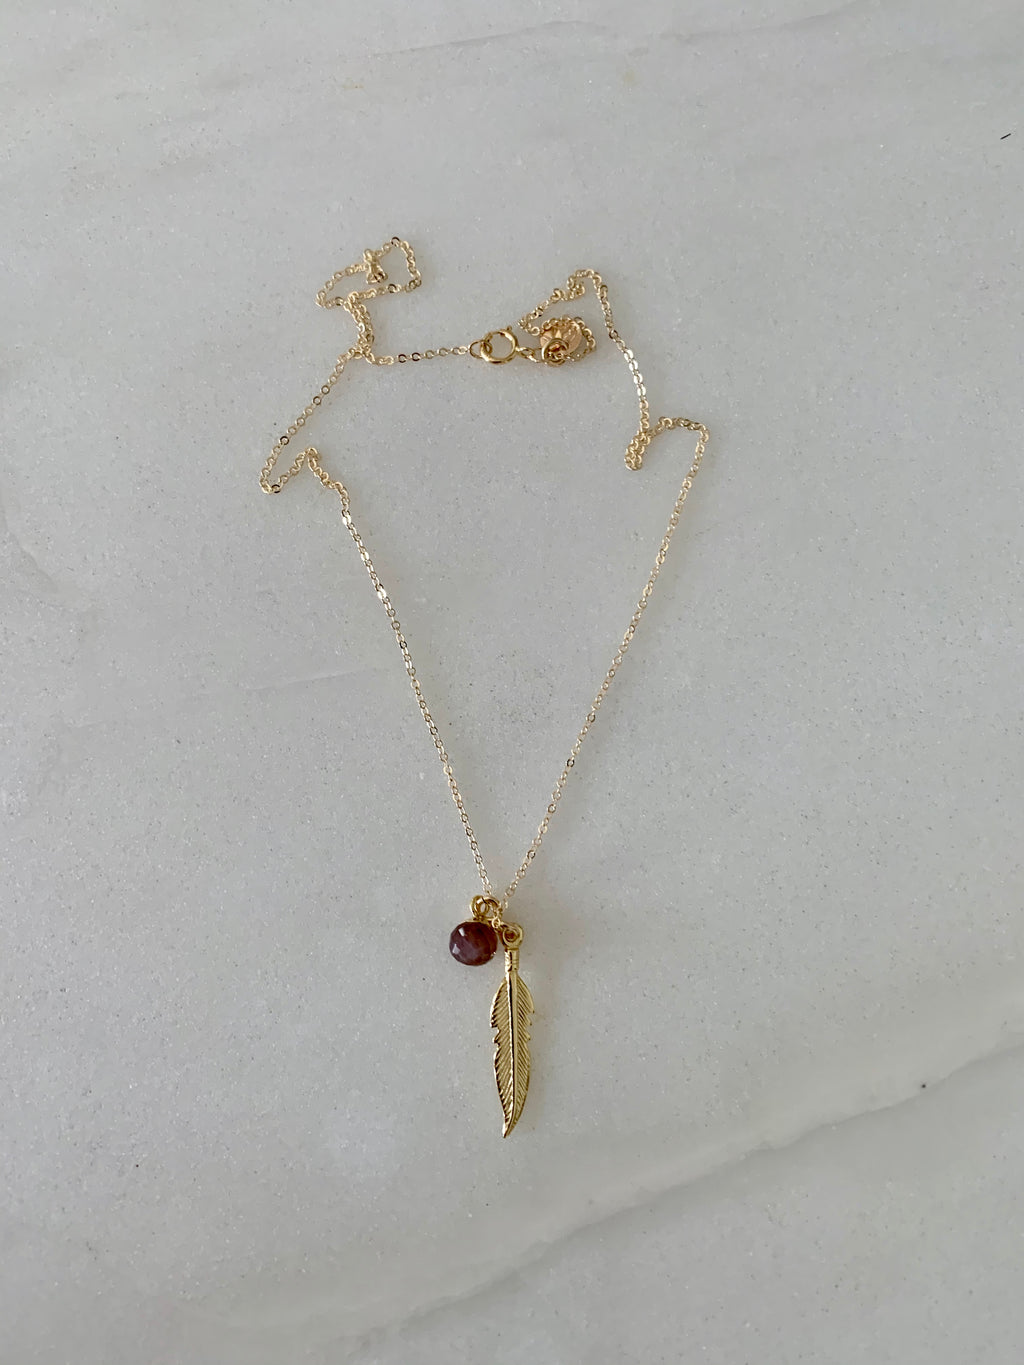 Feather and Moonstone Necklace